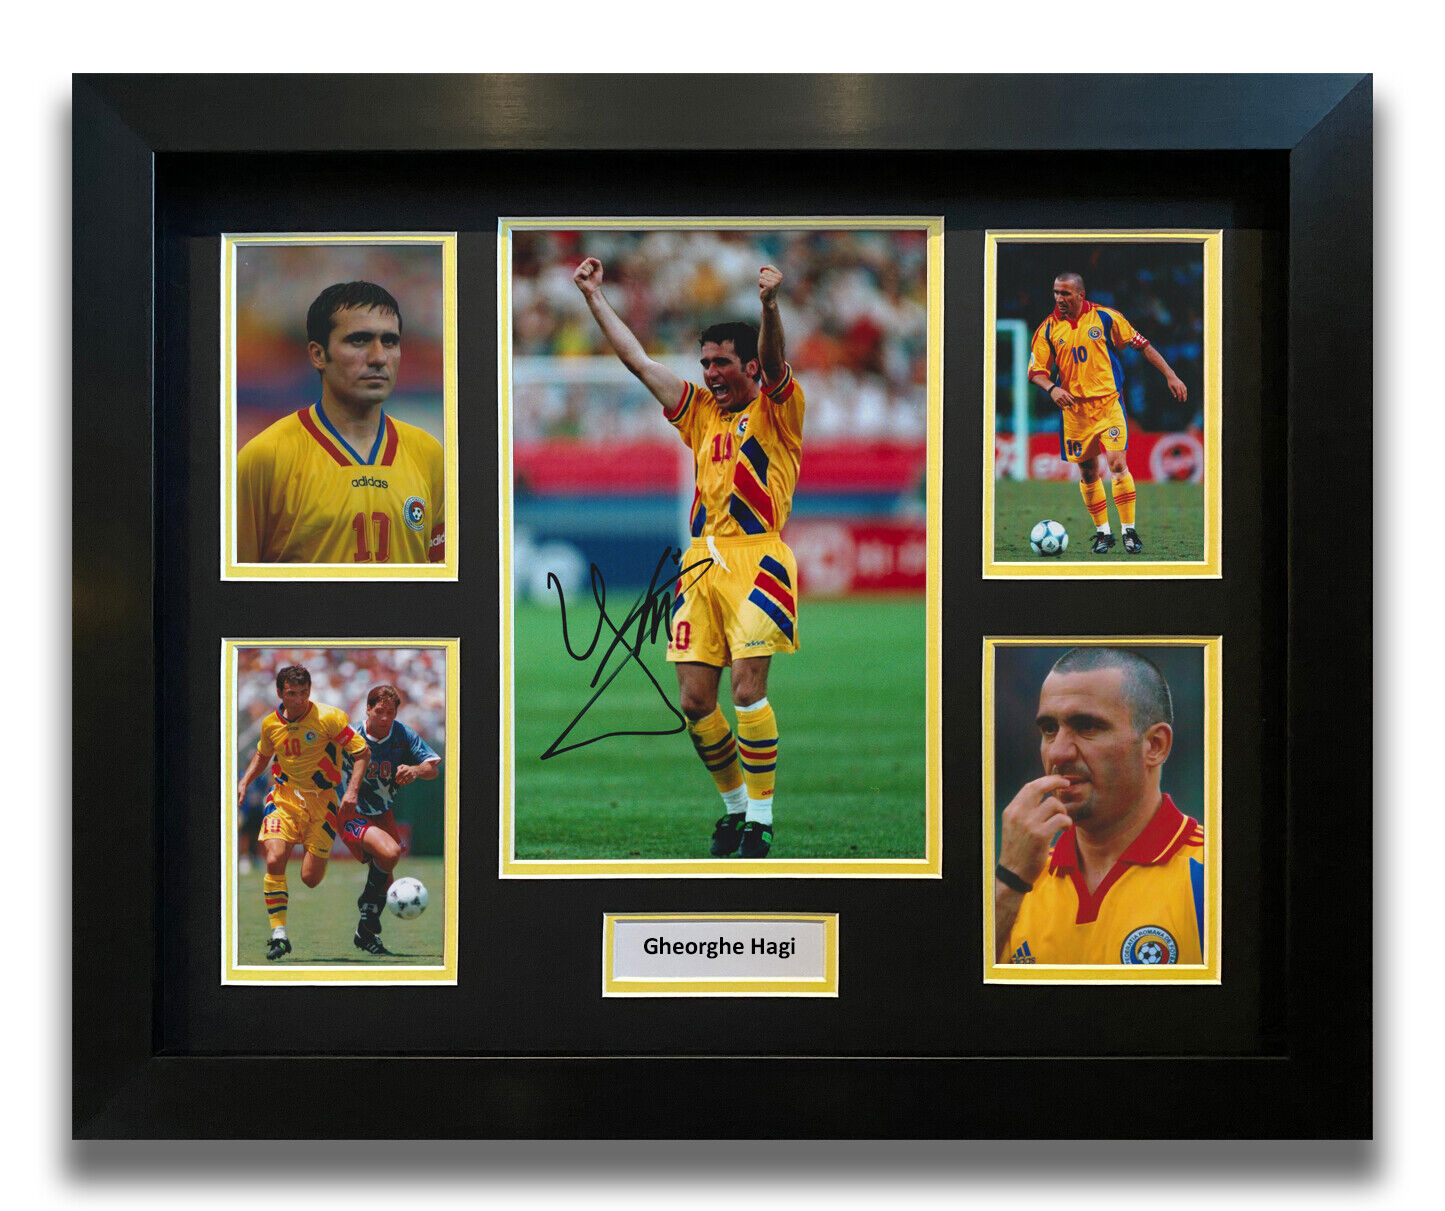 GHEORGHE HAGI HAND SIGNED FRAMED Photo Poster painting DISPLAY - ROMANIA AUTOGRAPH - FOOTBALL 6.